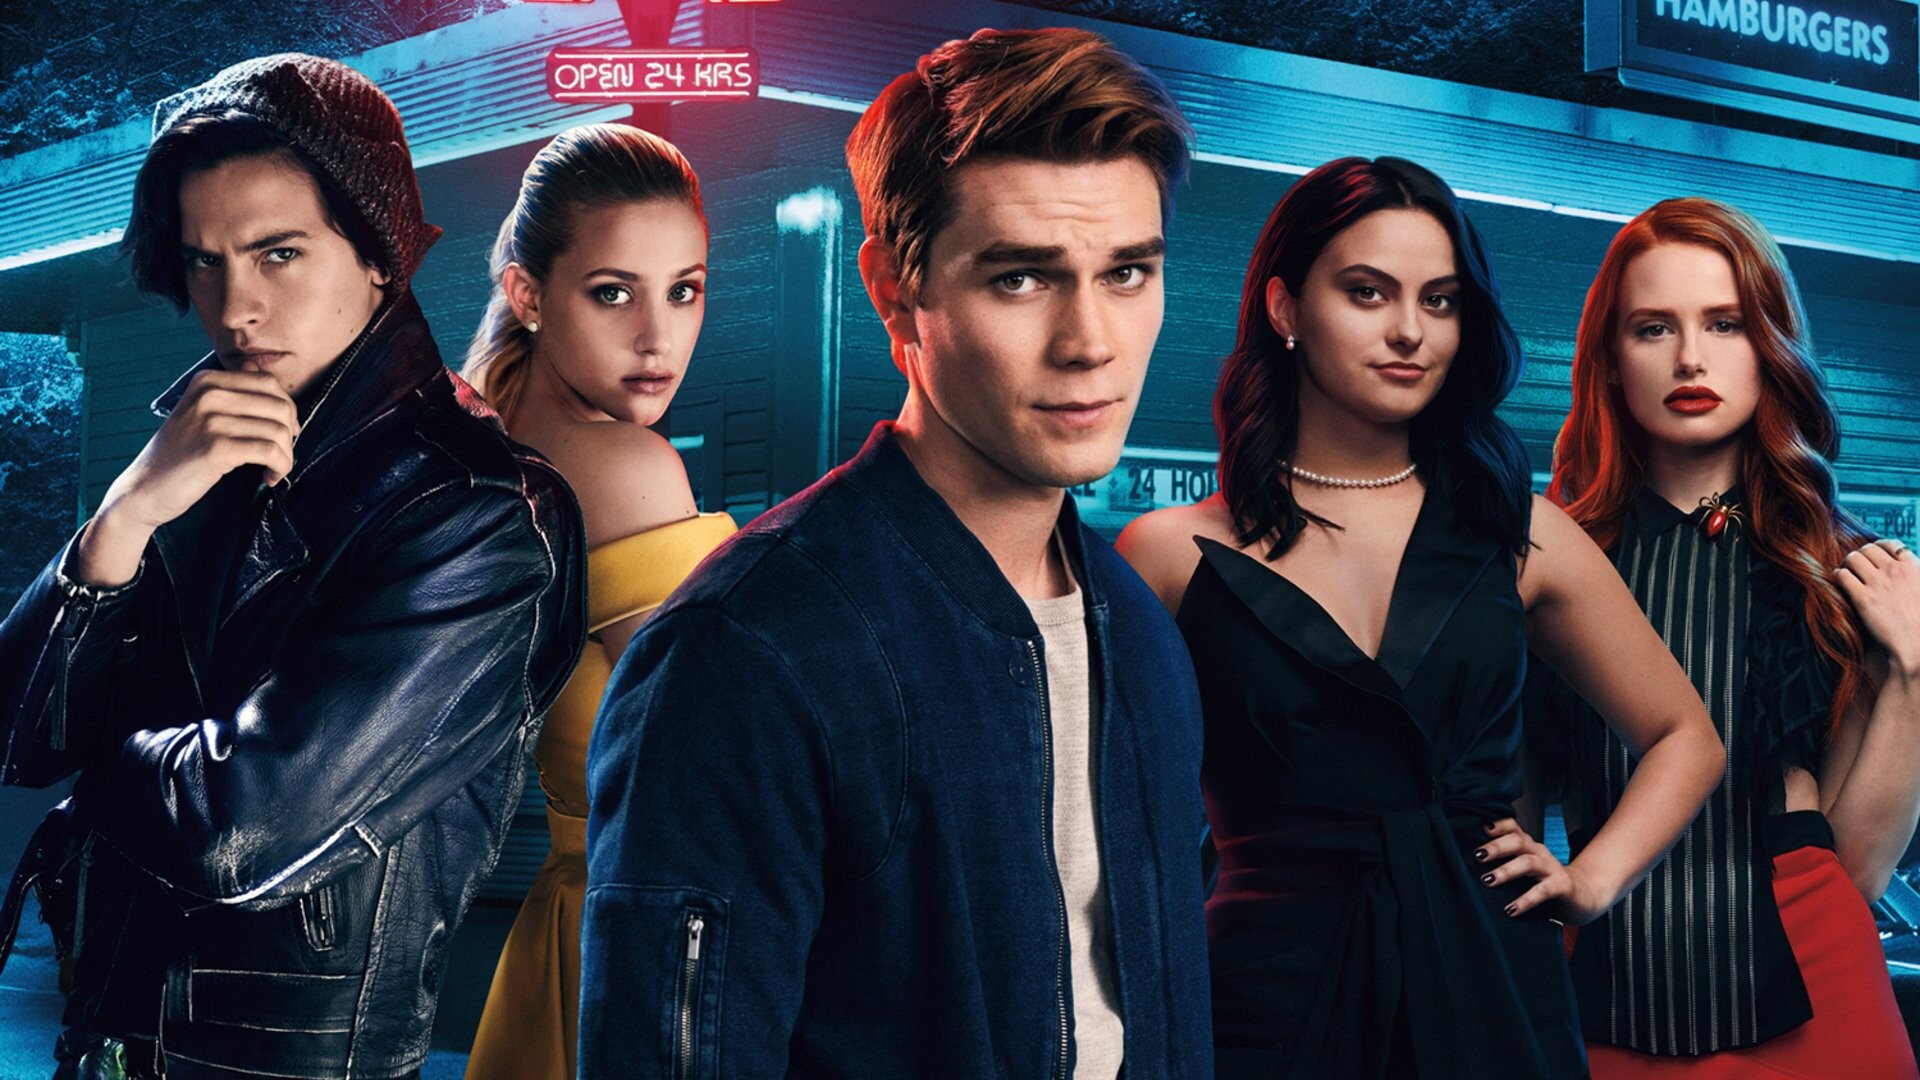 Riverdale (TV Series): The jock Archie, The girl next door Betty, The new girl Veronica, The outcast Jughead. 1920x1080 Full HD Background.